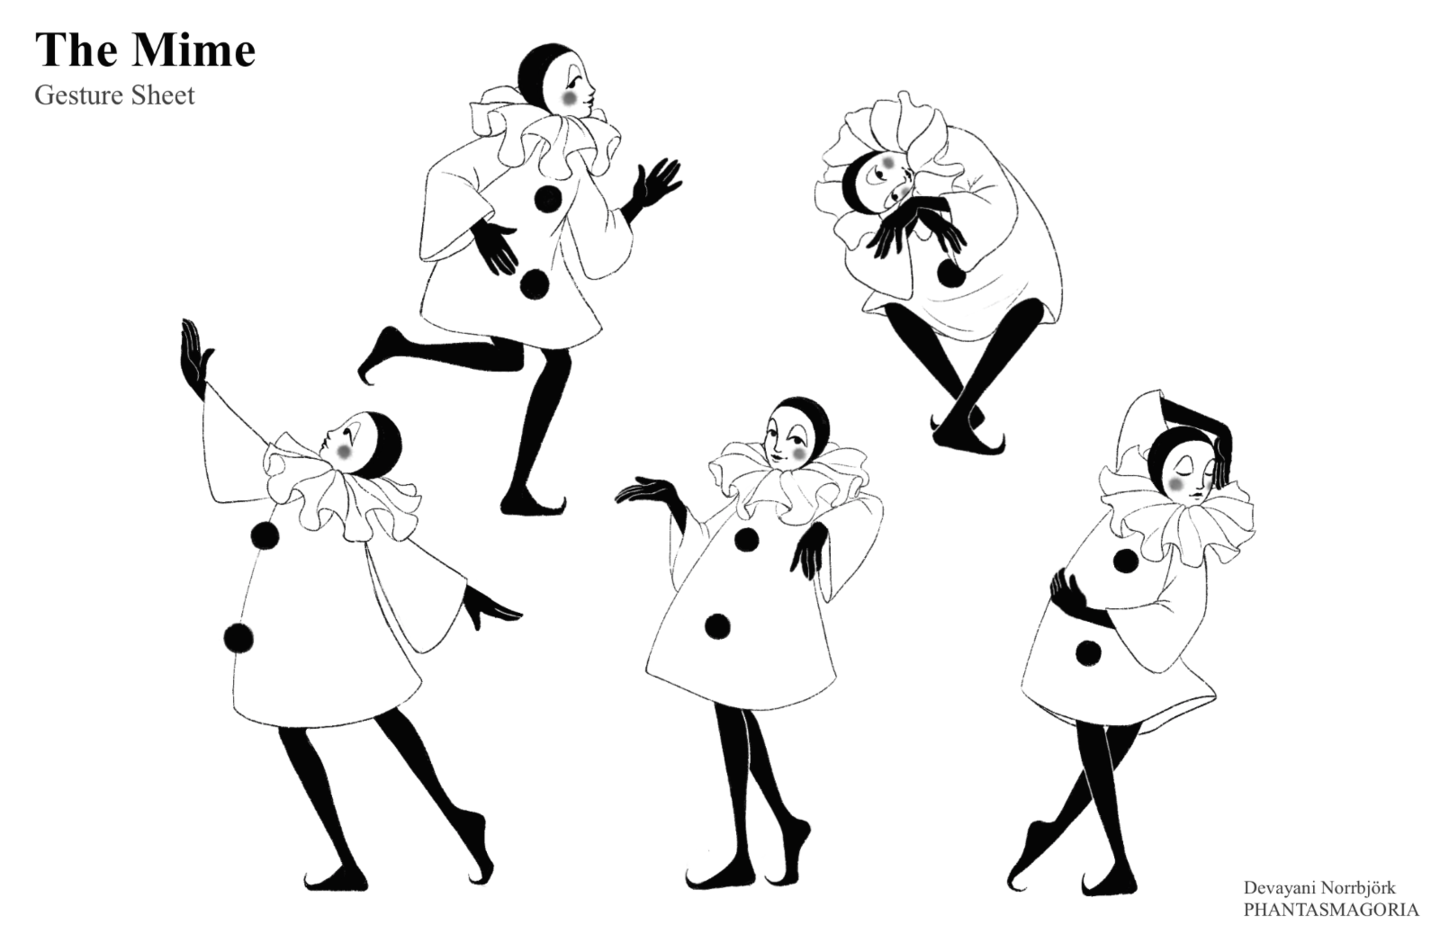 Drawings of a mime in different expressive poses.